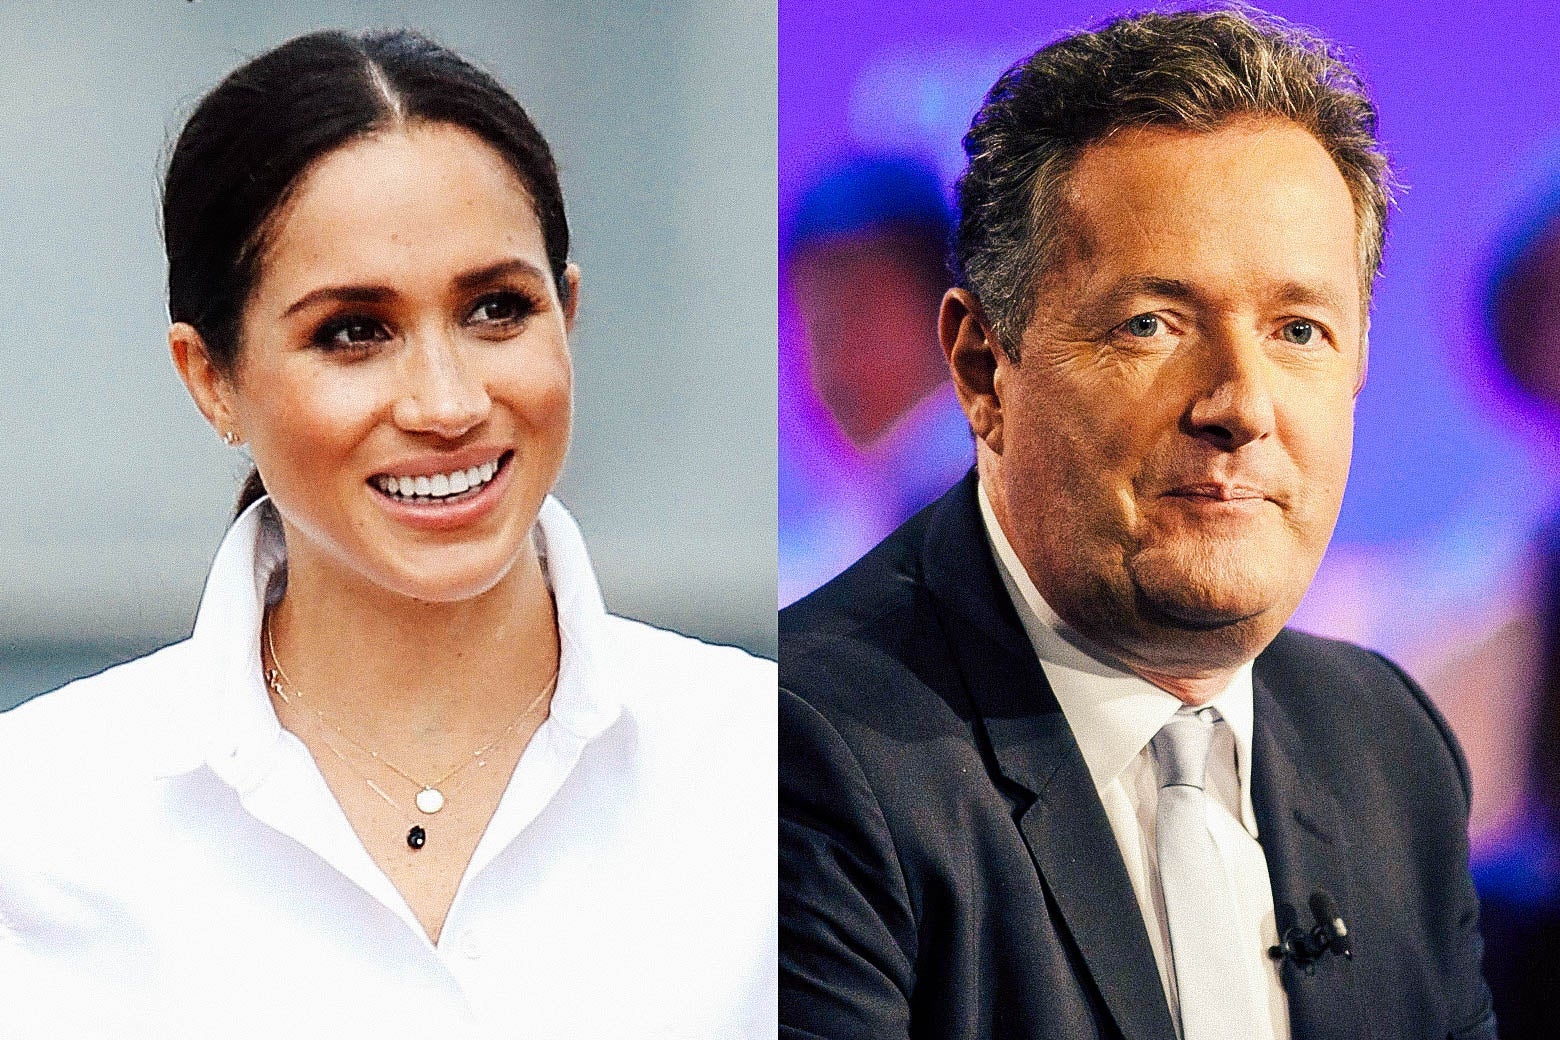 Meghan Markle on the left smiling and Piers Morgan on the right looking at the camera.